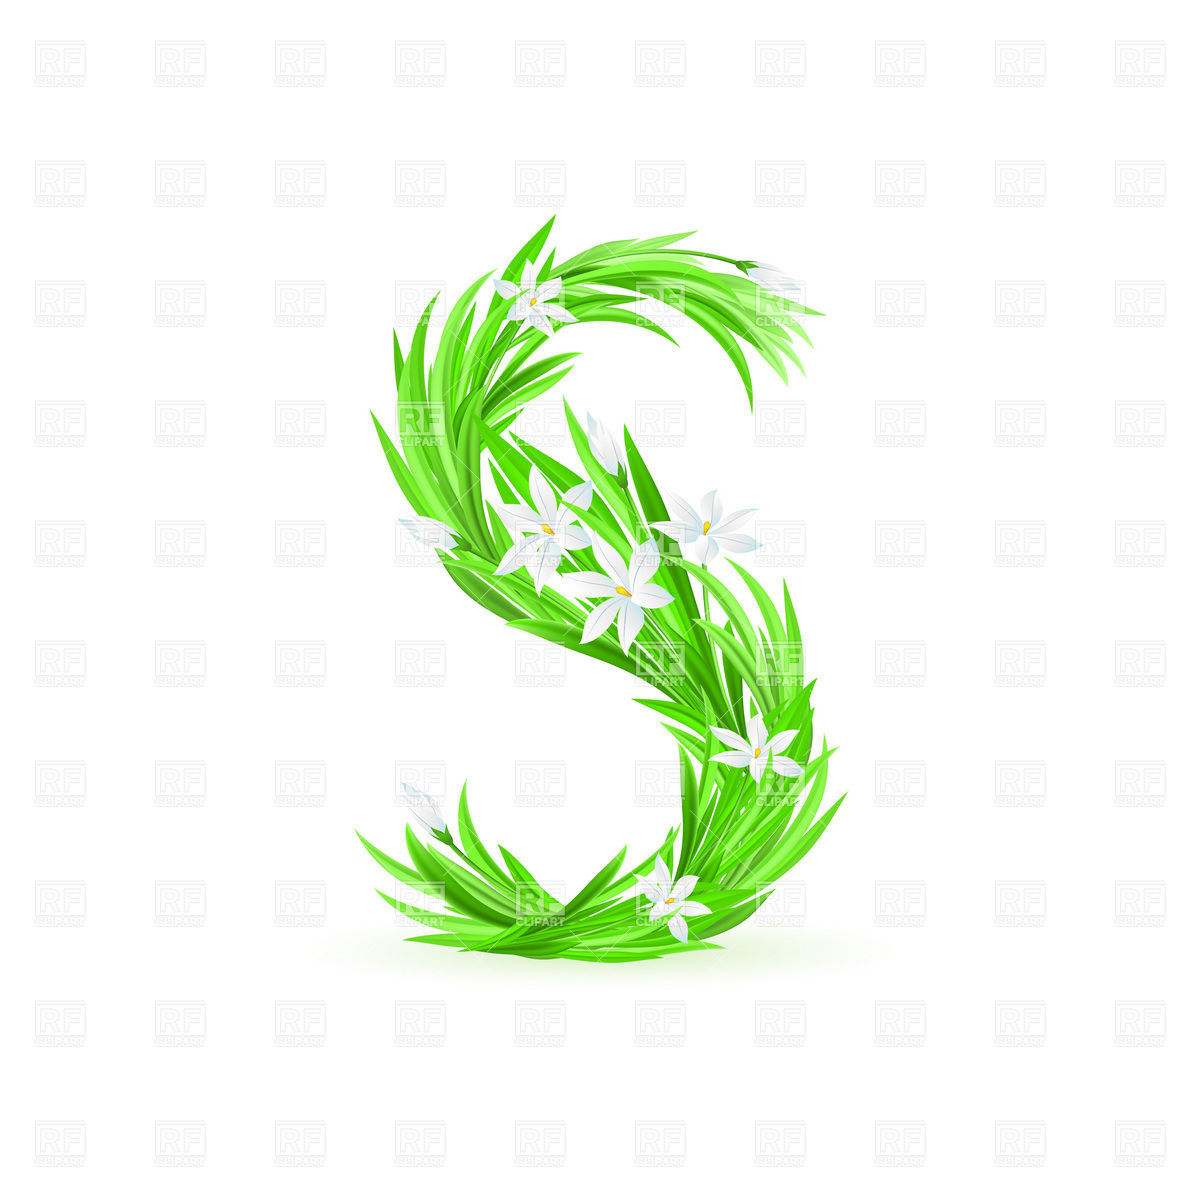 Grass And Spring Flowers Font Letter S 8372 Backgrounds Textures